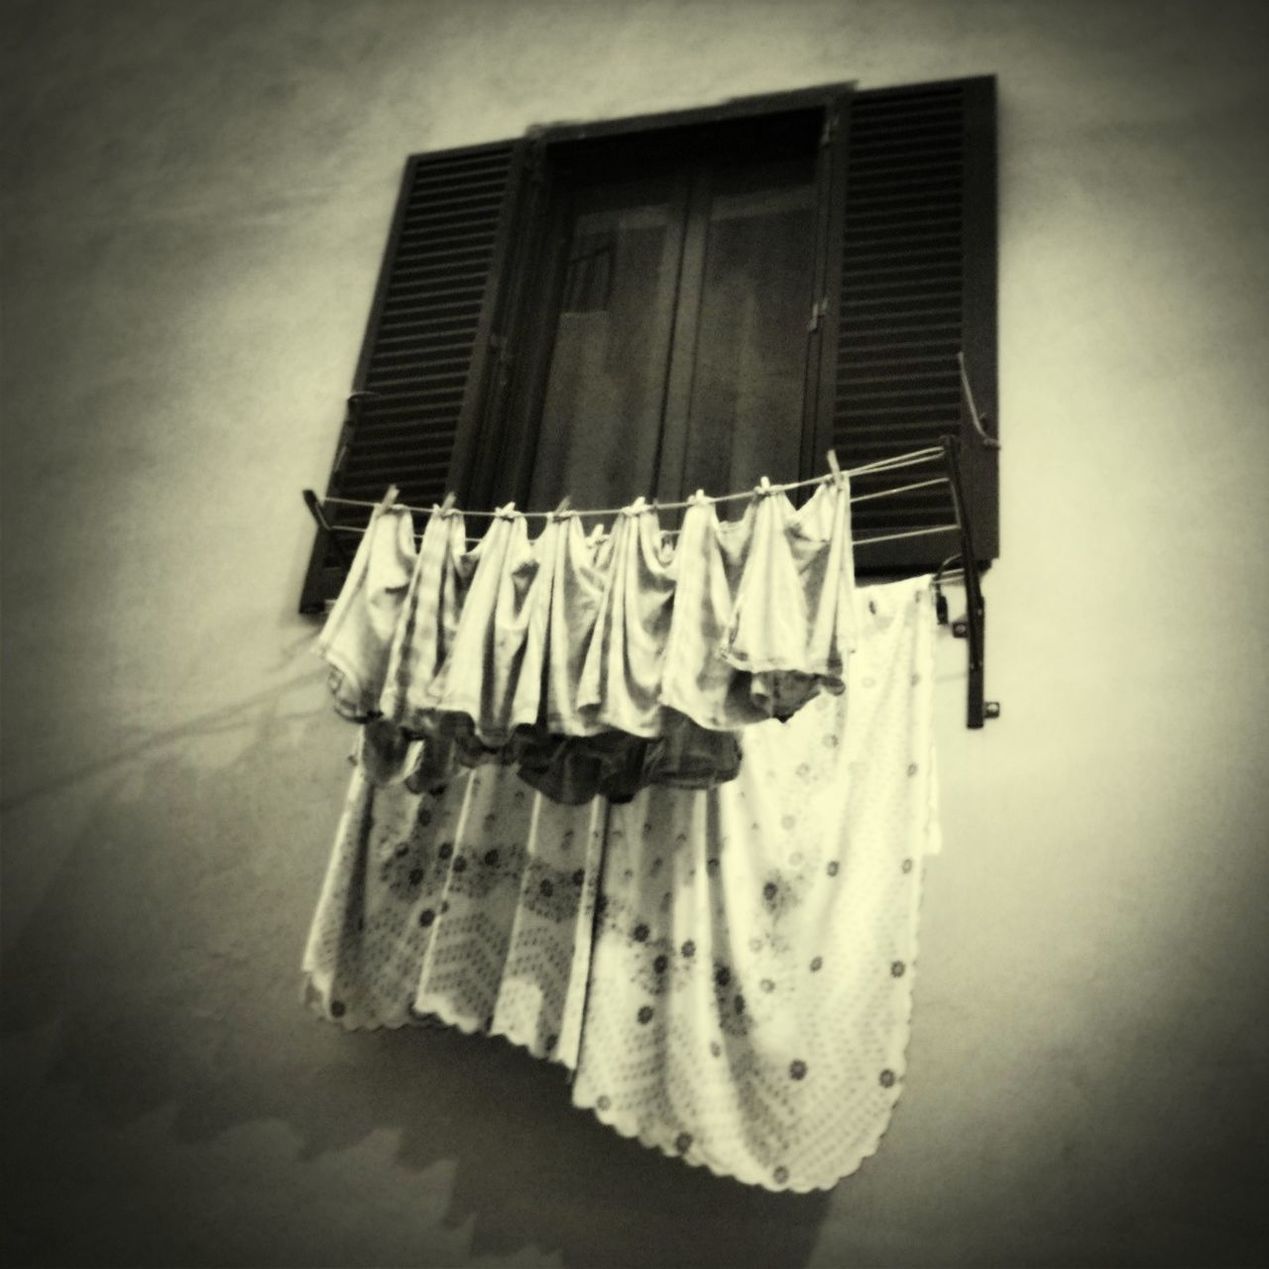 Clothes drying outside window